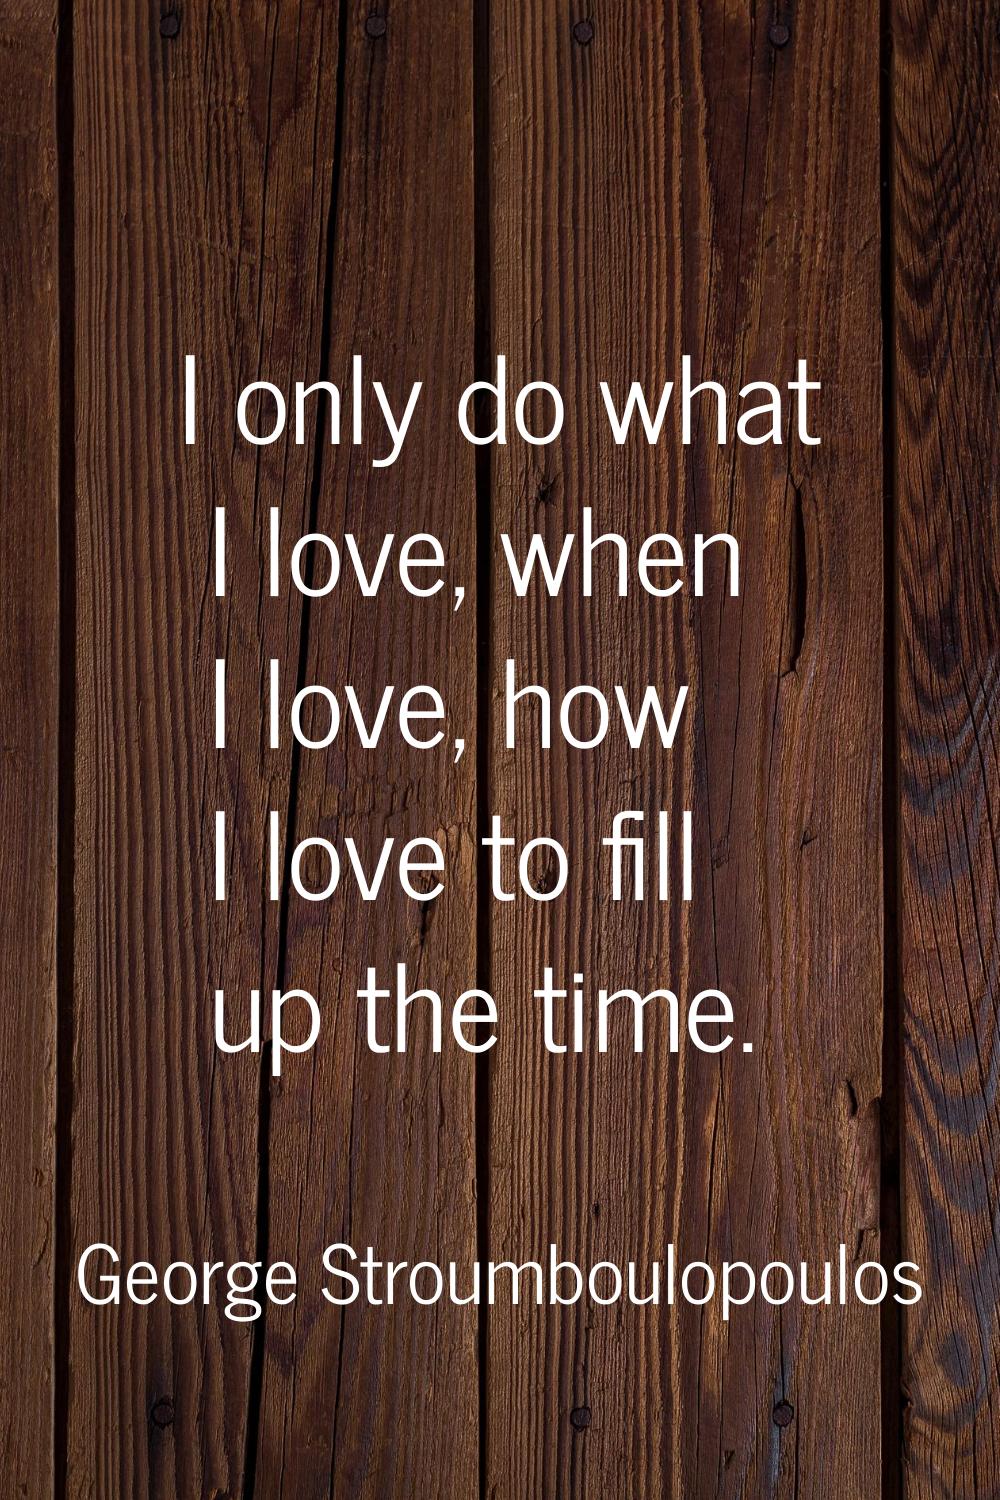 I only do what I love, when I love, how I love to fill up the time.